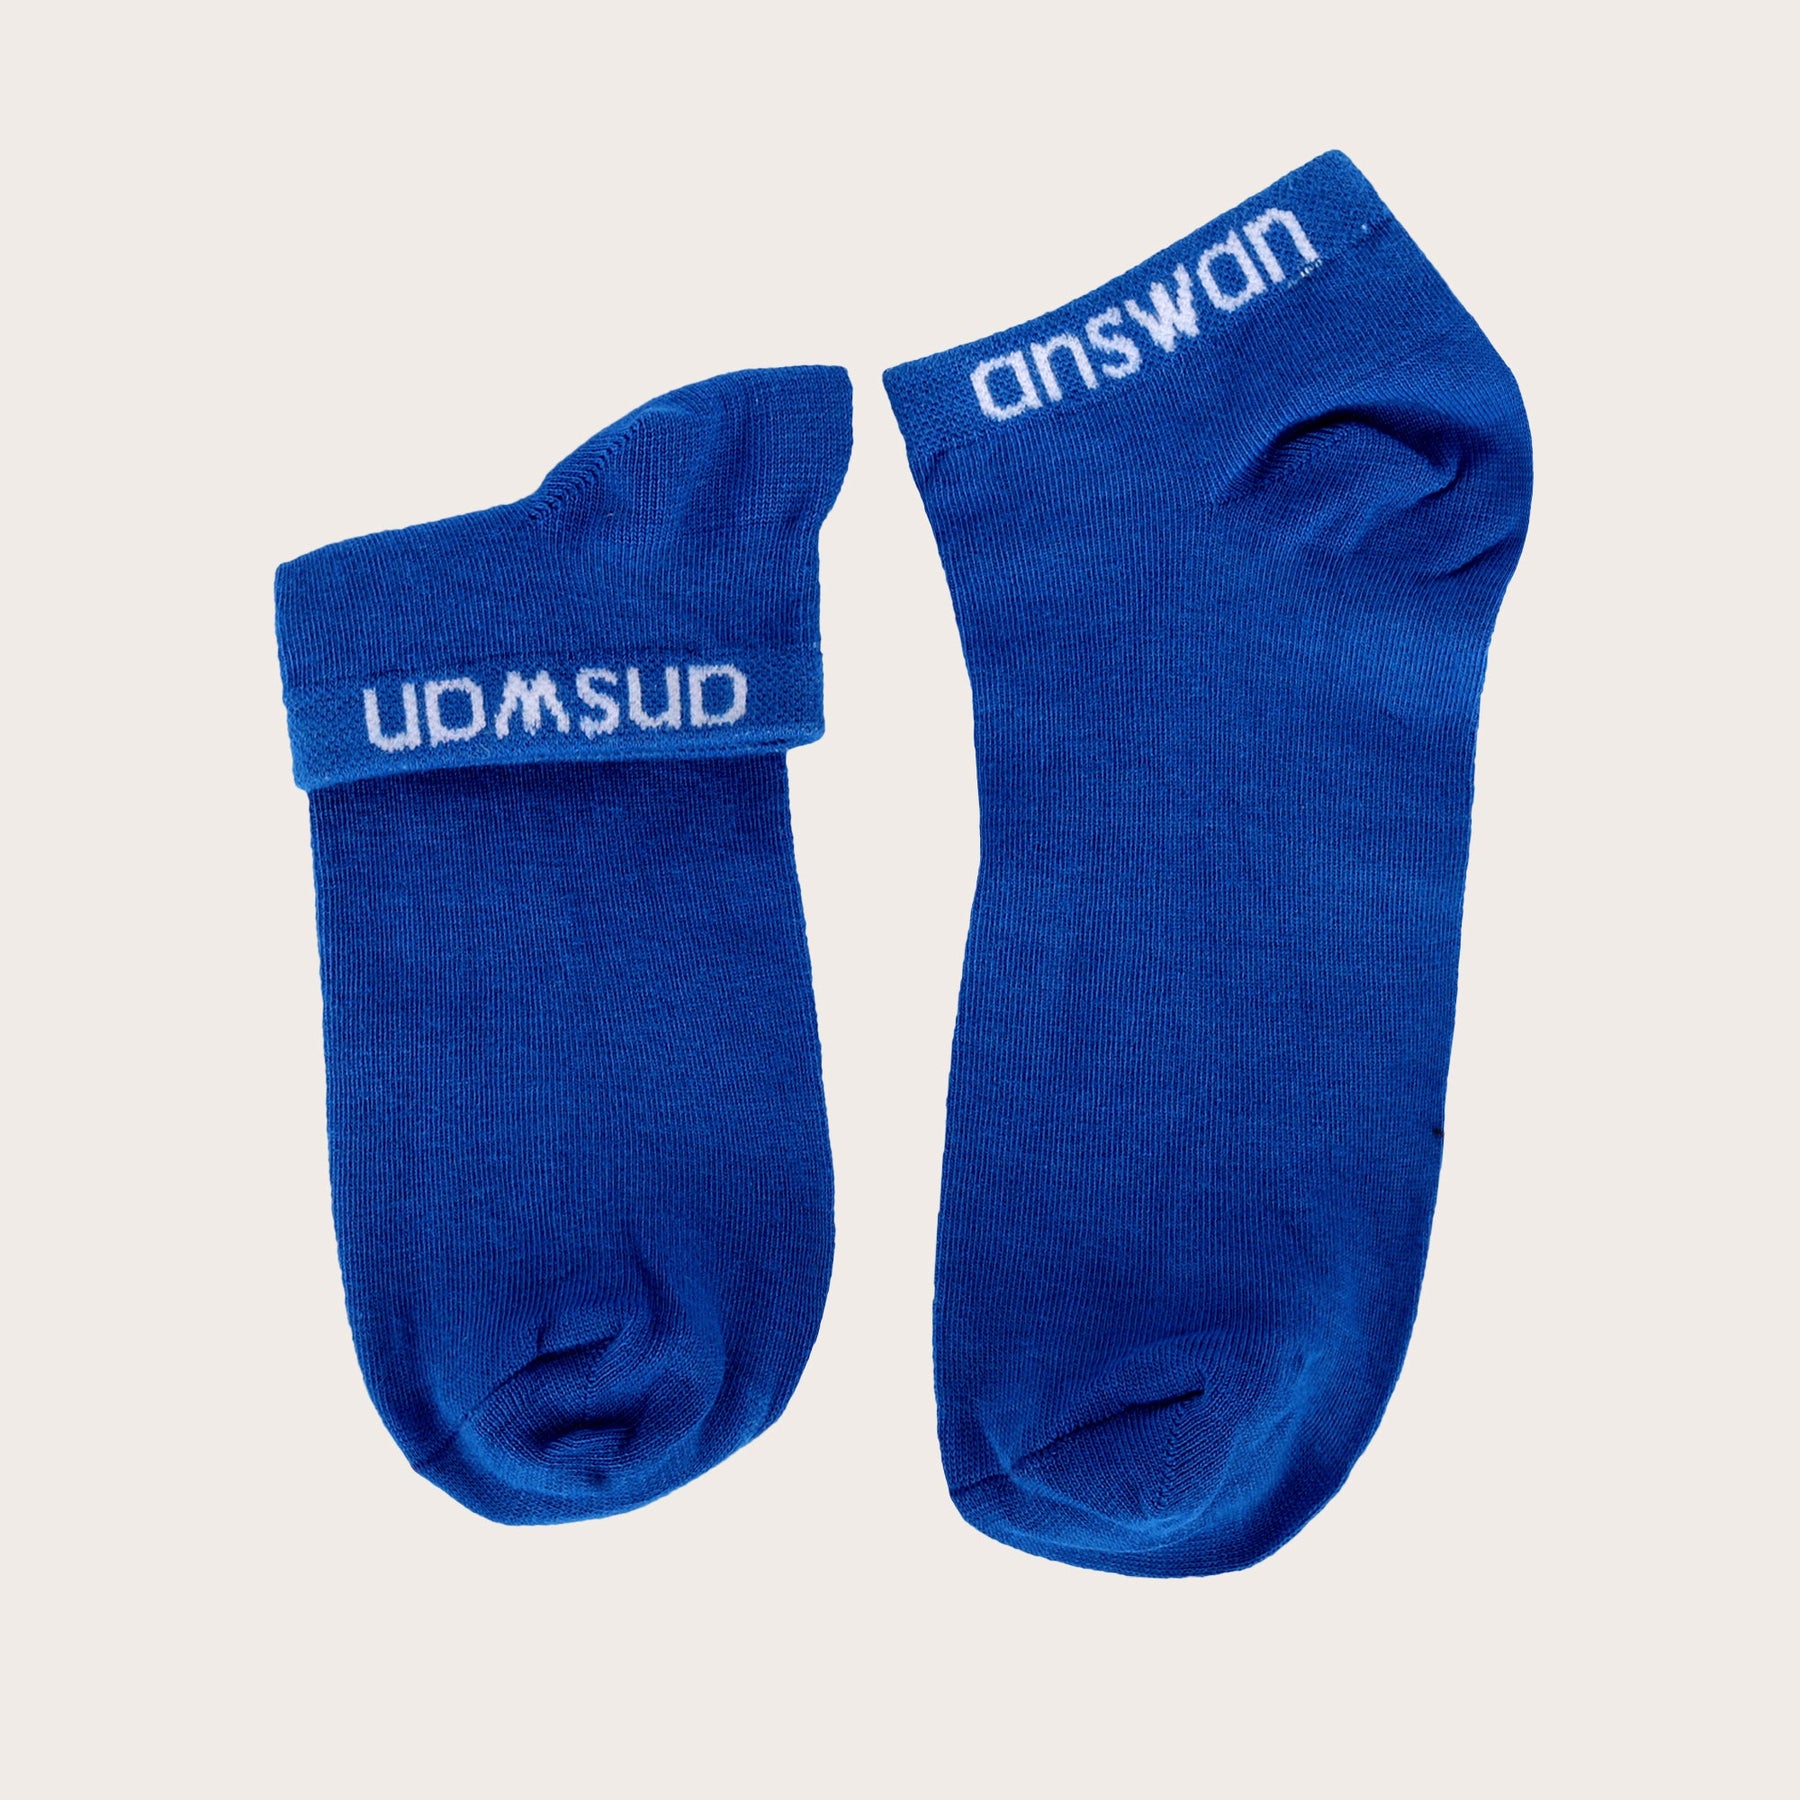 AMSWAN UNISEX LOW ANKLE SOCKS UNI SIZE PACK OF 05